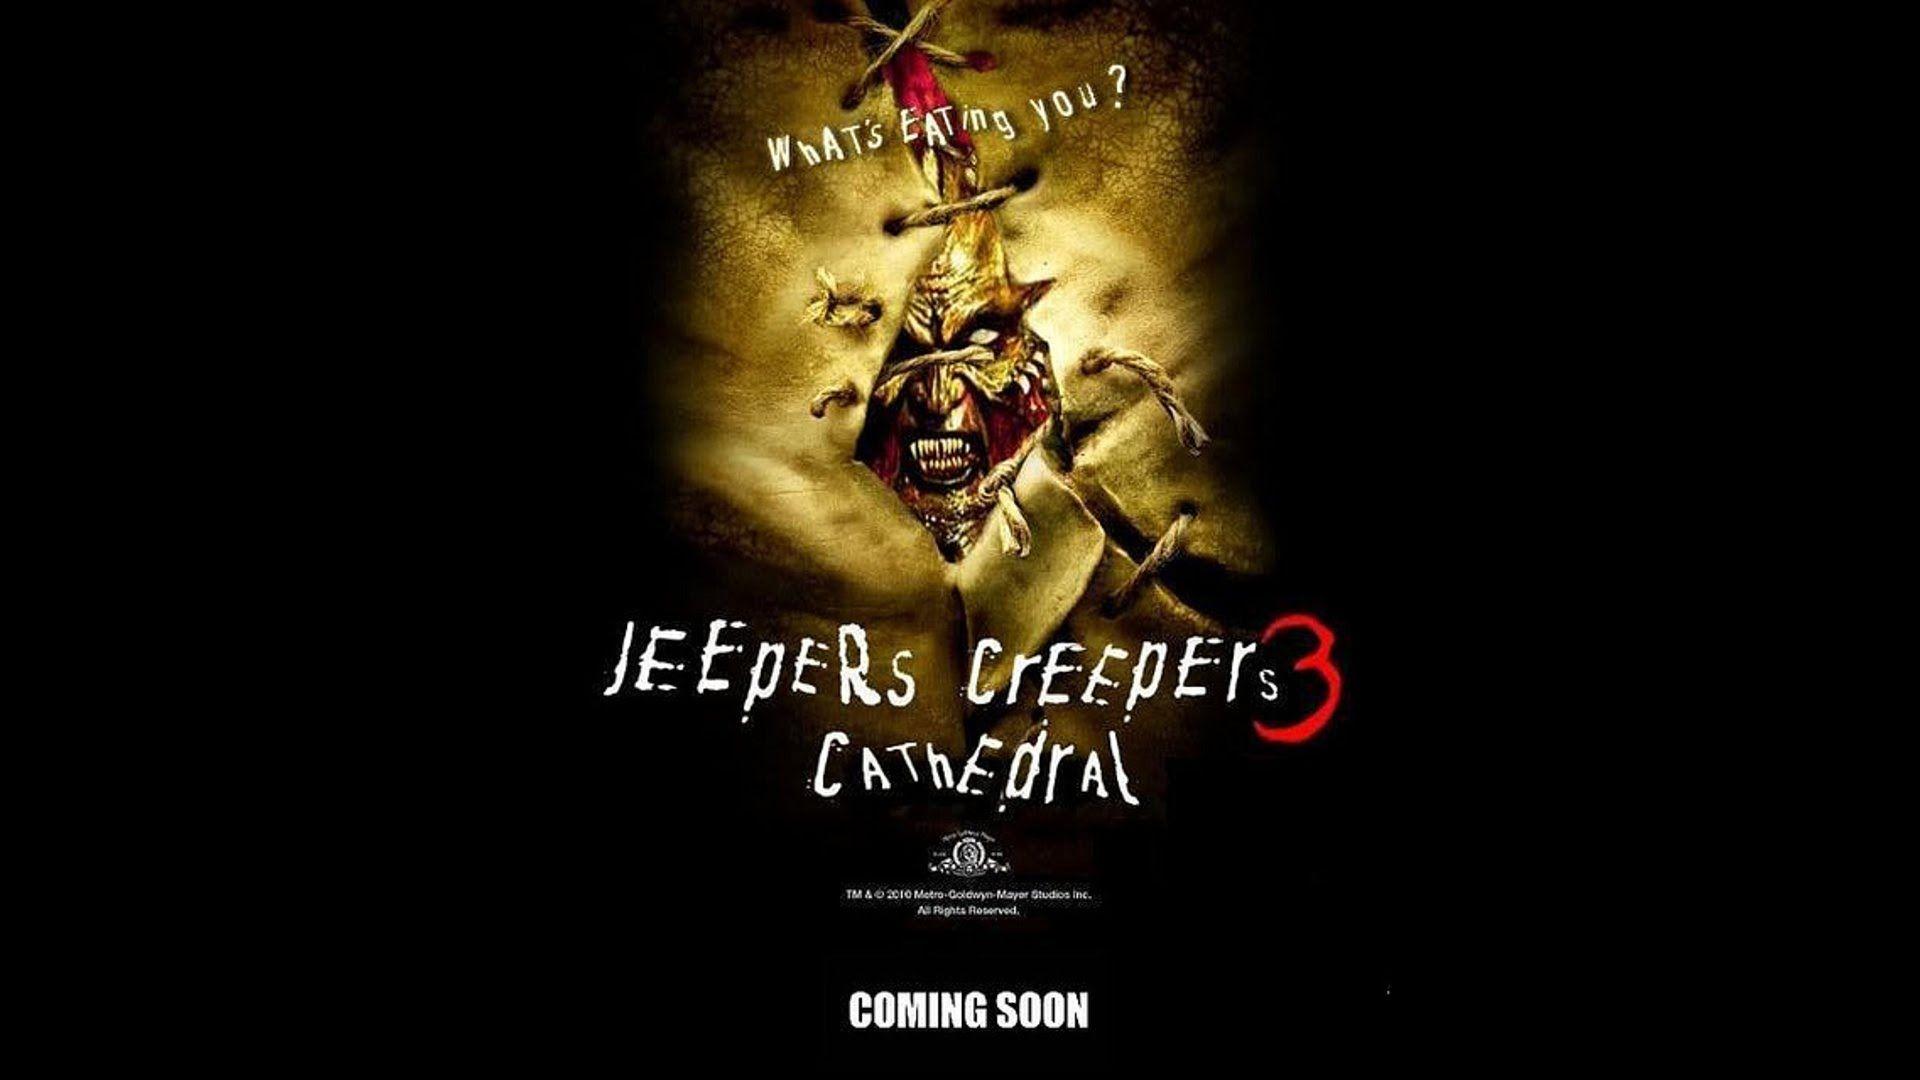 JEEPERS CREEPERS 3 PLOT INCLUDING THE ORIGINS OF THE CREEPER